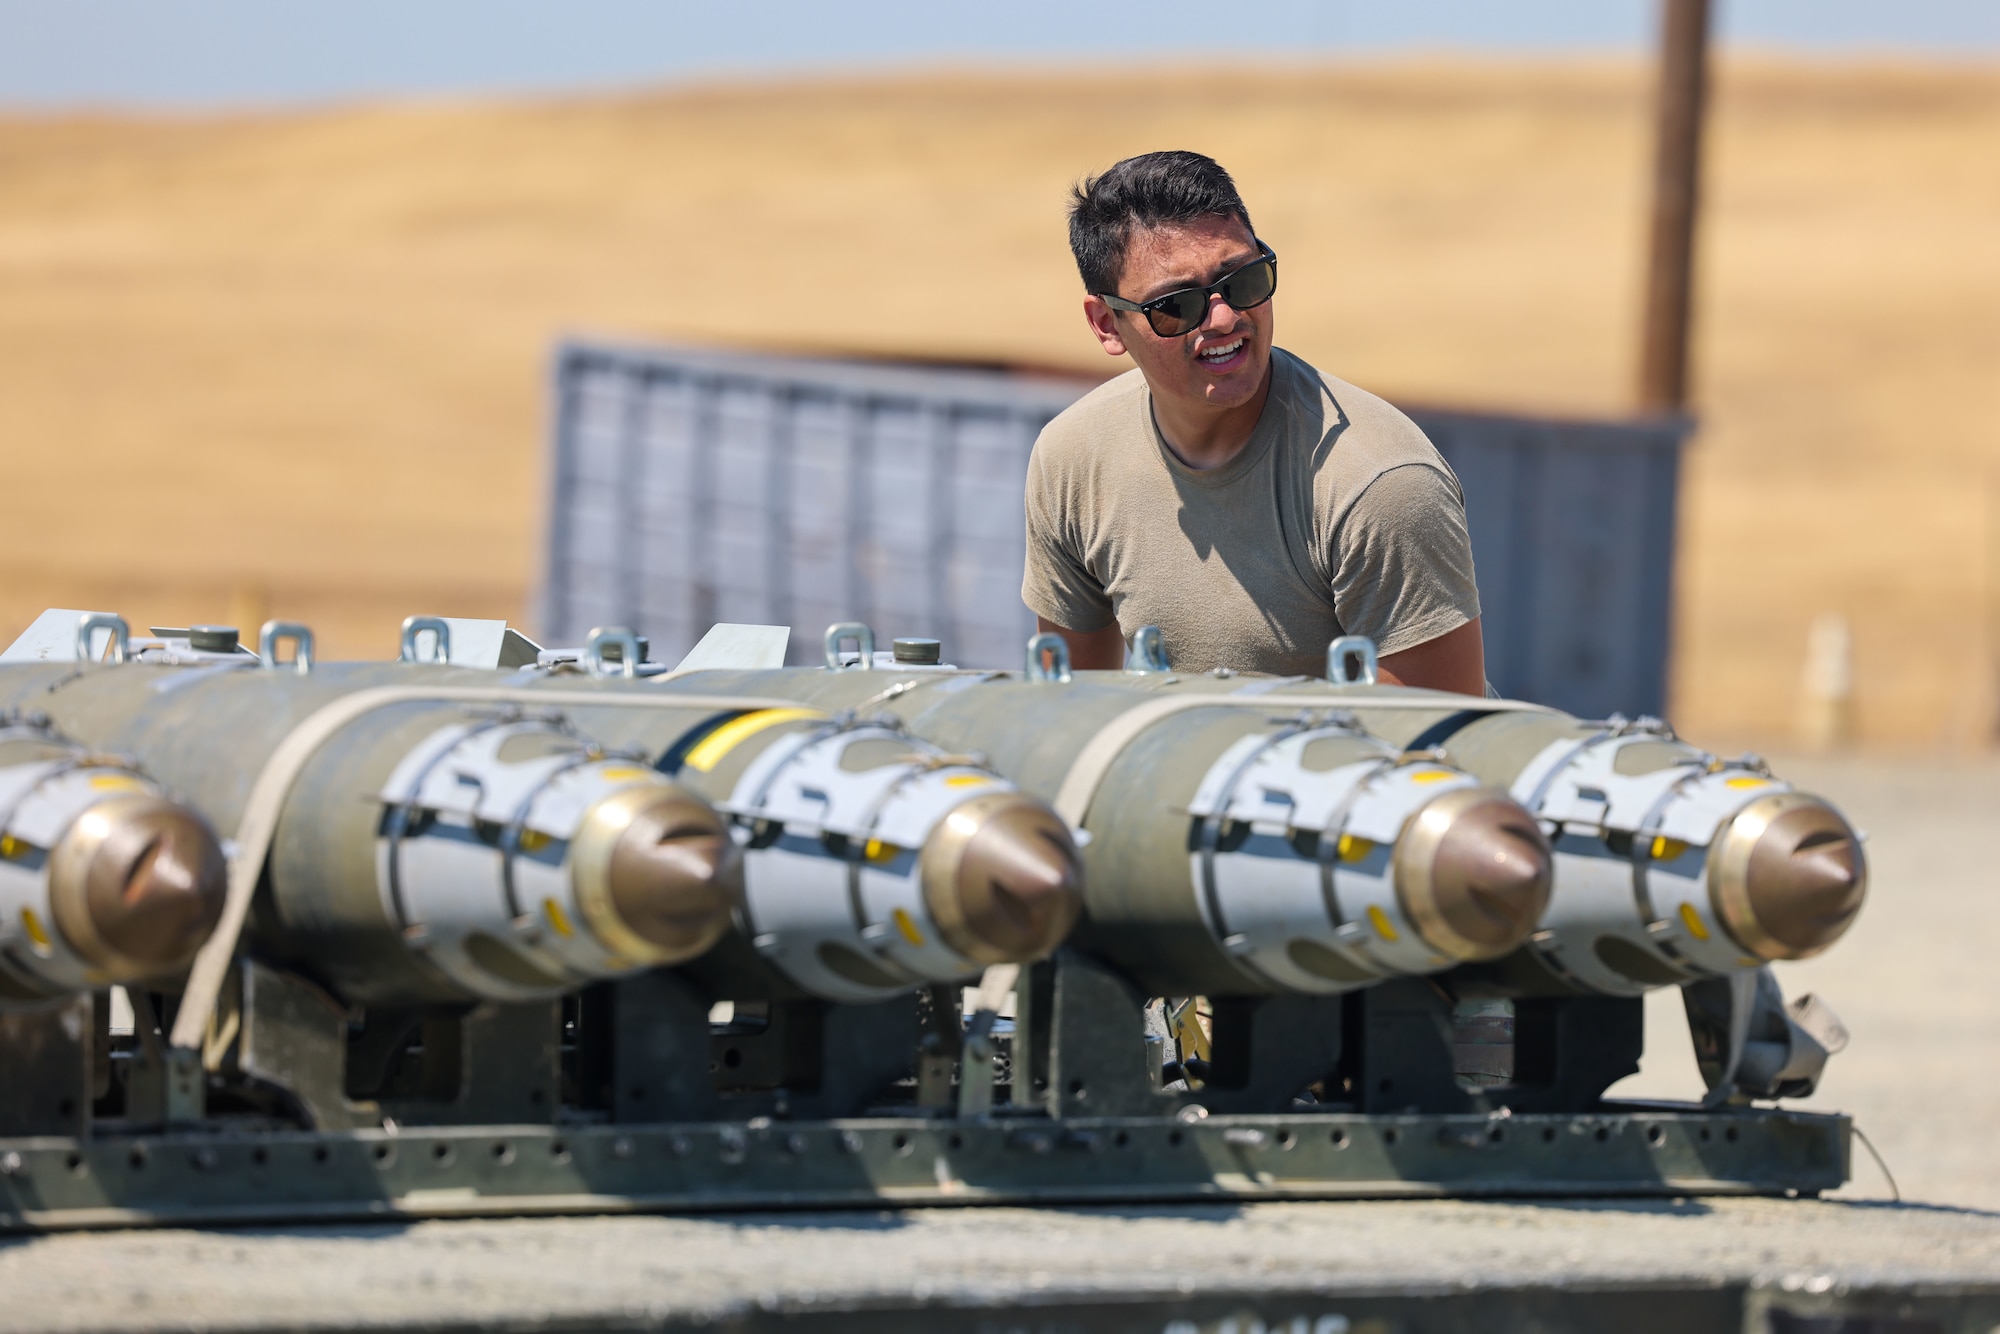 U.S. Air Force Senior Airman Nicolas Gonzales, 56th Equipment Maintenance Squadron stockpile maintenance crew chief, from Luke Air Force Base, Arizona, performs a foreign object debris check before simulating transporting bombs to the flight line during the Air Force Combat Operations Competition (AFCOCOMP) on Beale AFB, California, Aug. 24, 2023.